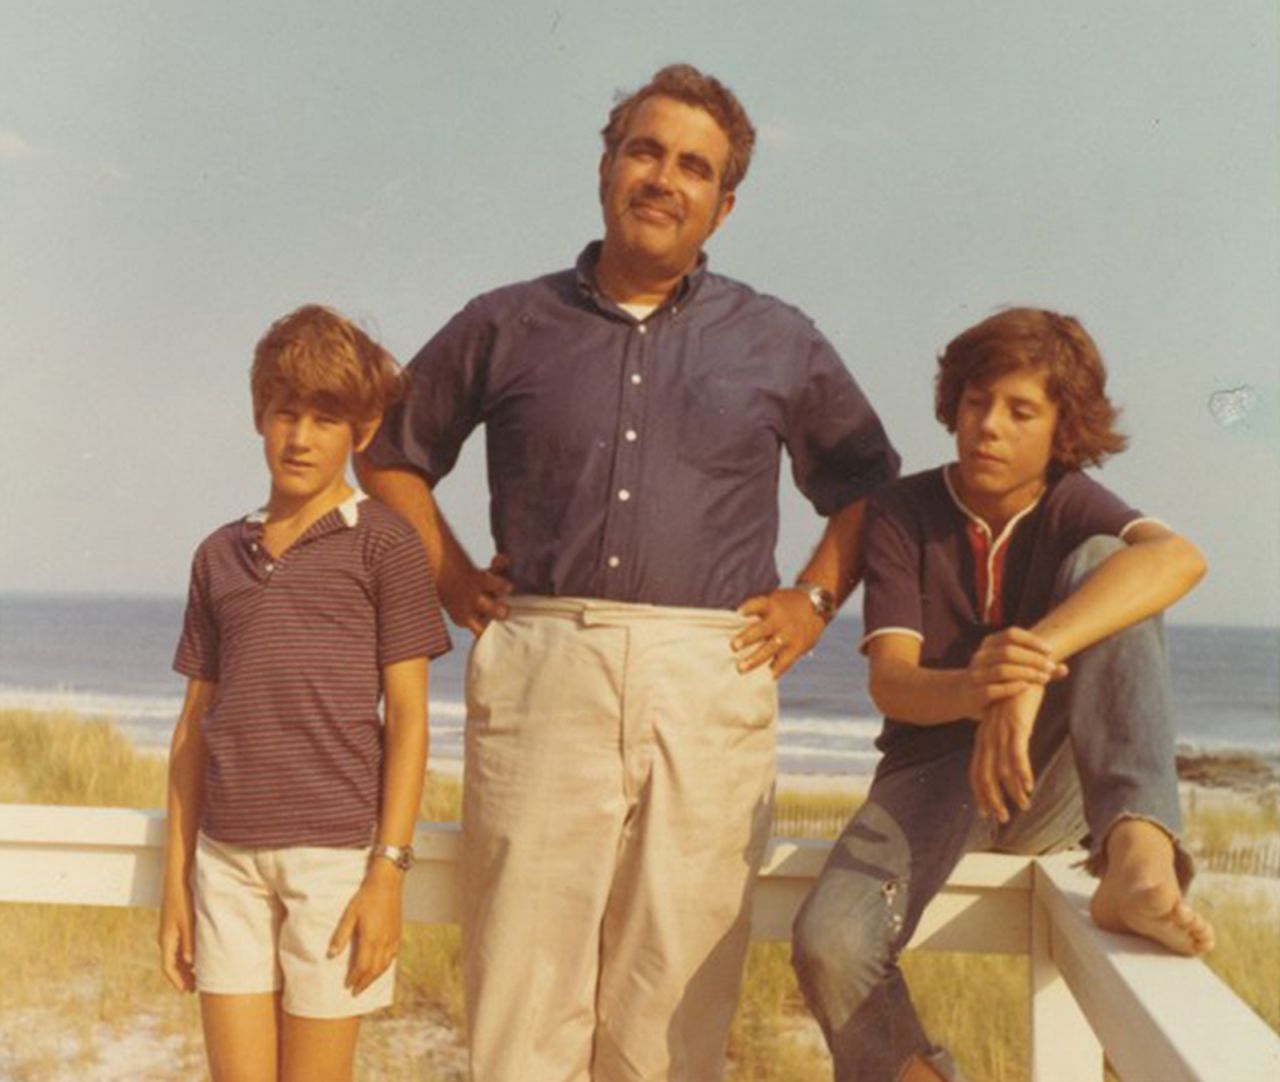 A young Bourdain, right, takes a photo with his dad, Pierre, and his brother, Christopher, on New Jersey's Long Beach Island in 1970. Pierre Bourdain was a music executive with Columbia Records. His wife, Gladys, was an editor for The New York Times.